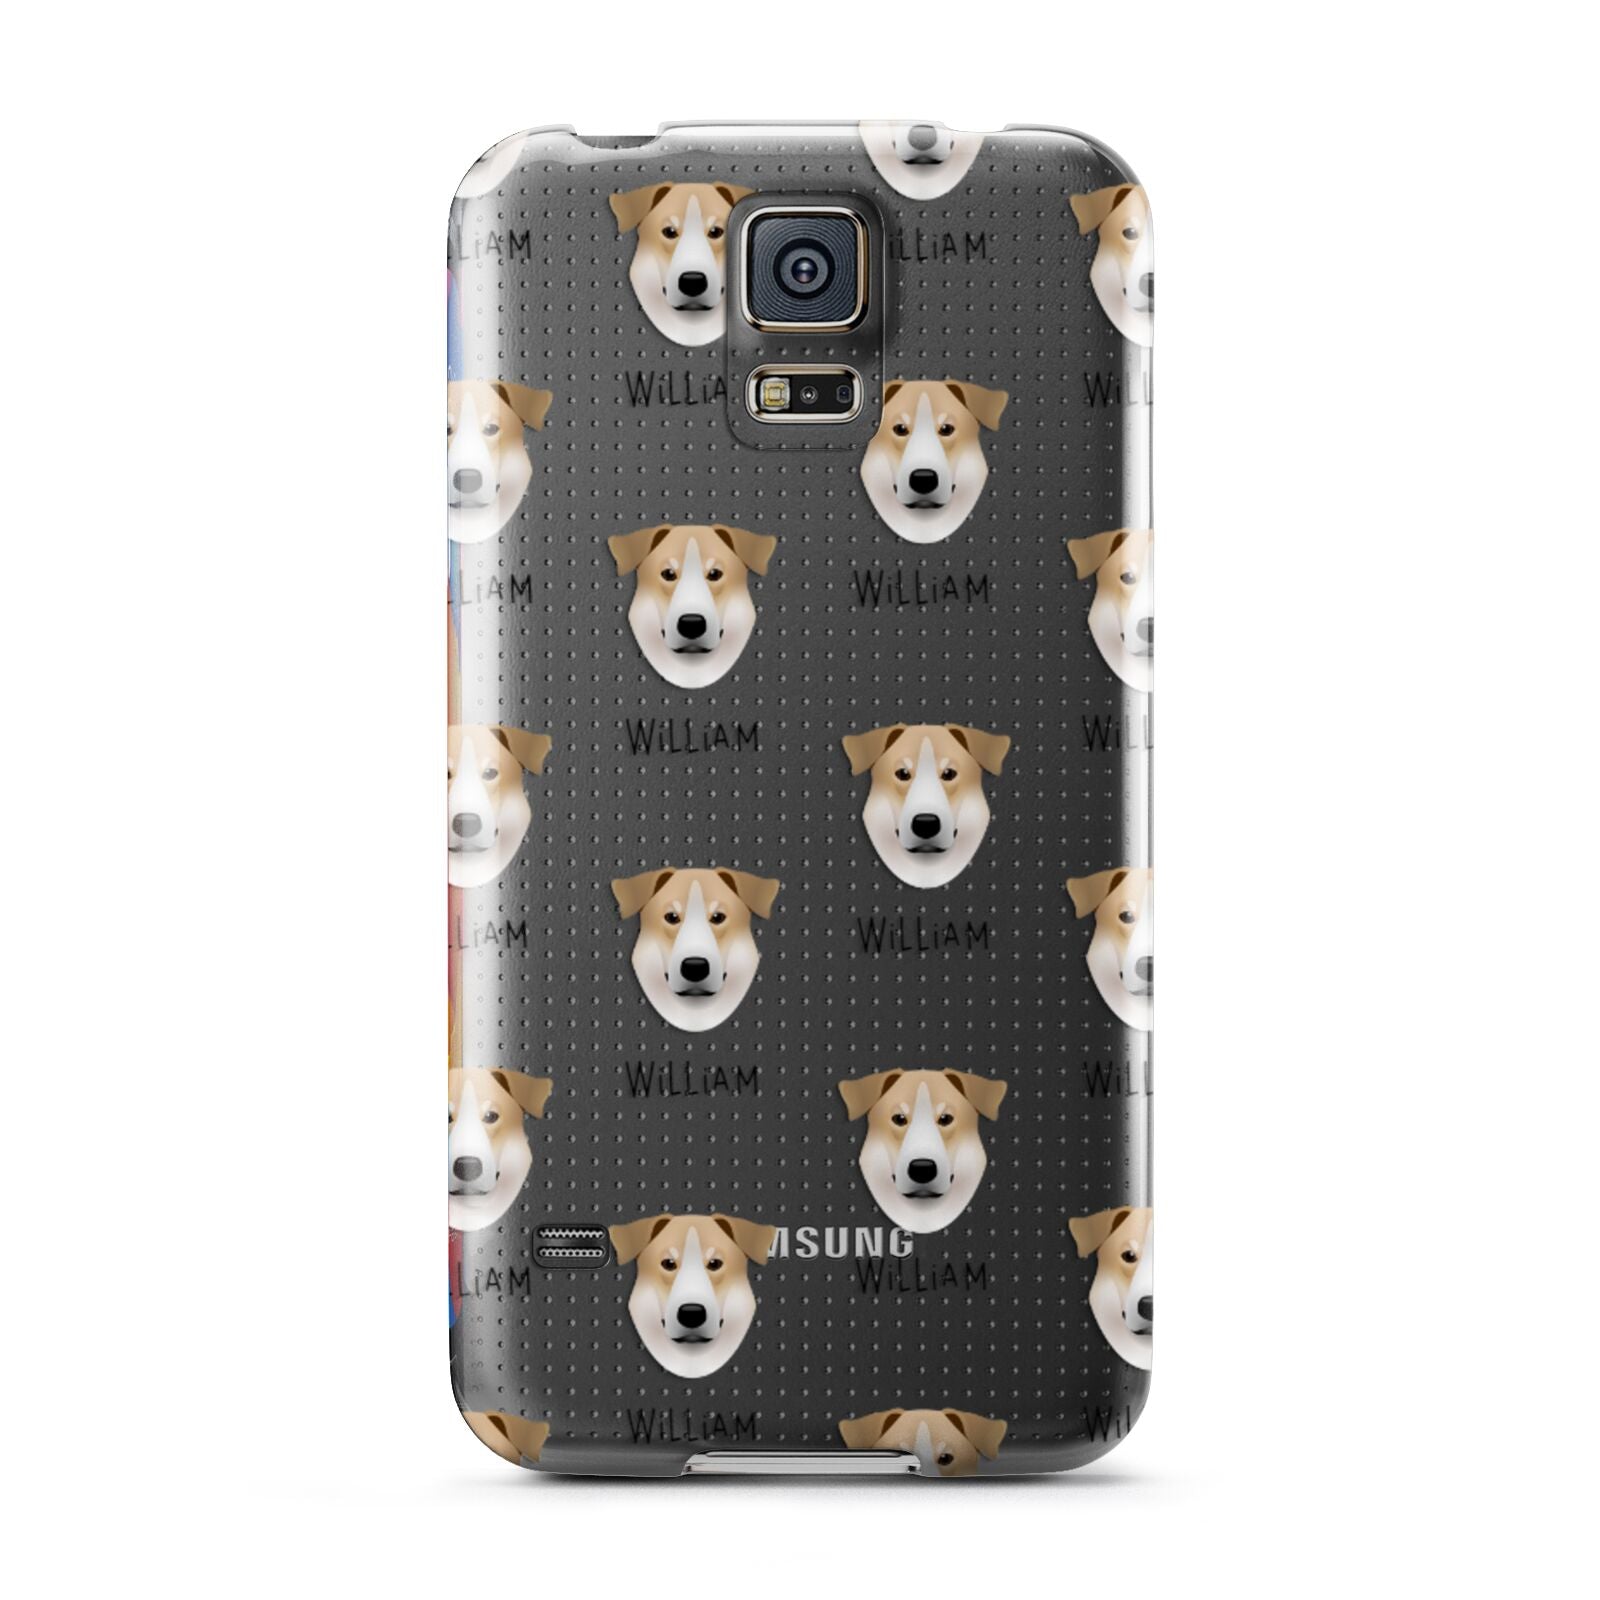 Chinook Icon with Name Samsung Galaxy S5 Case